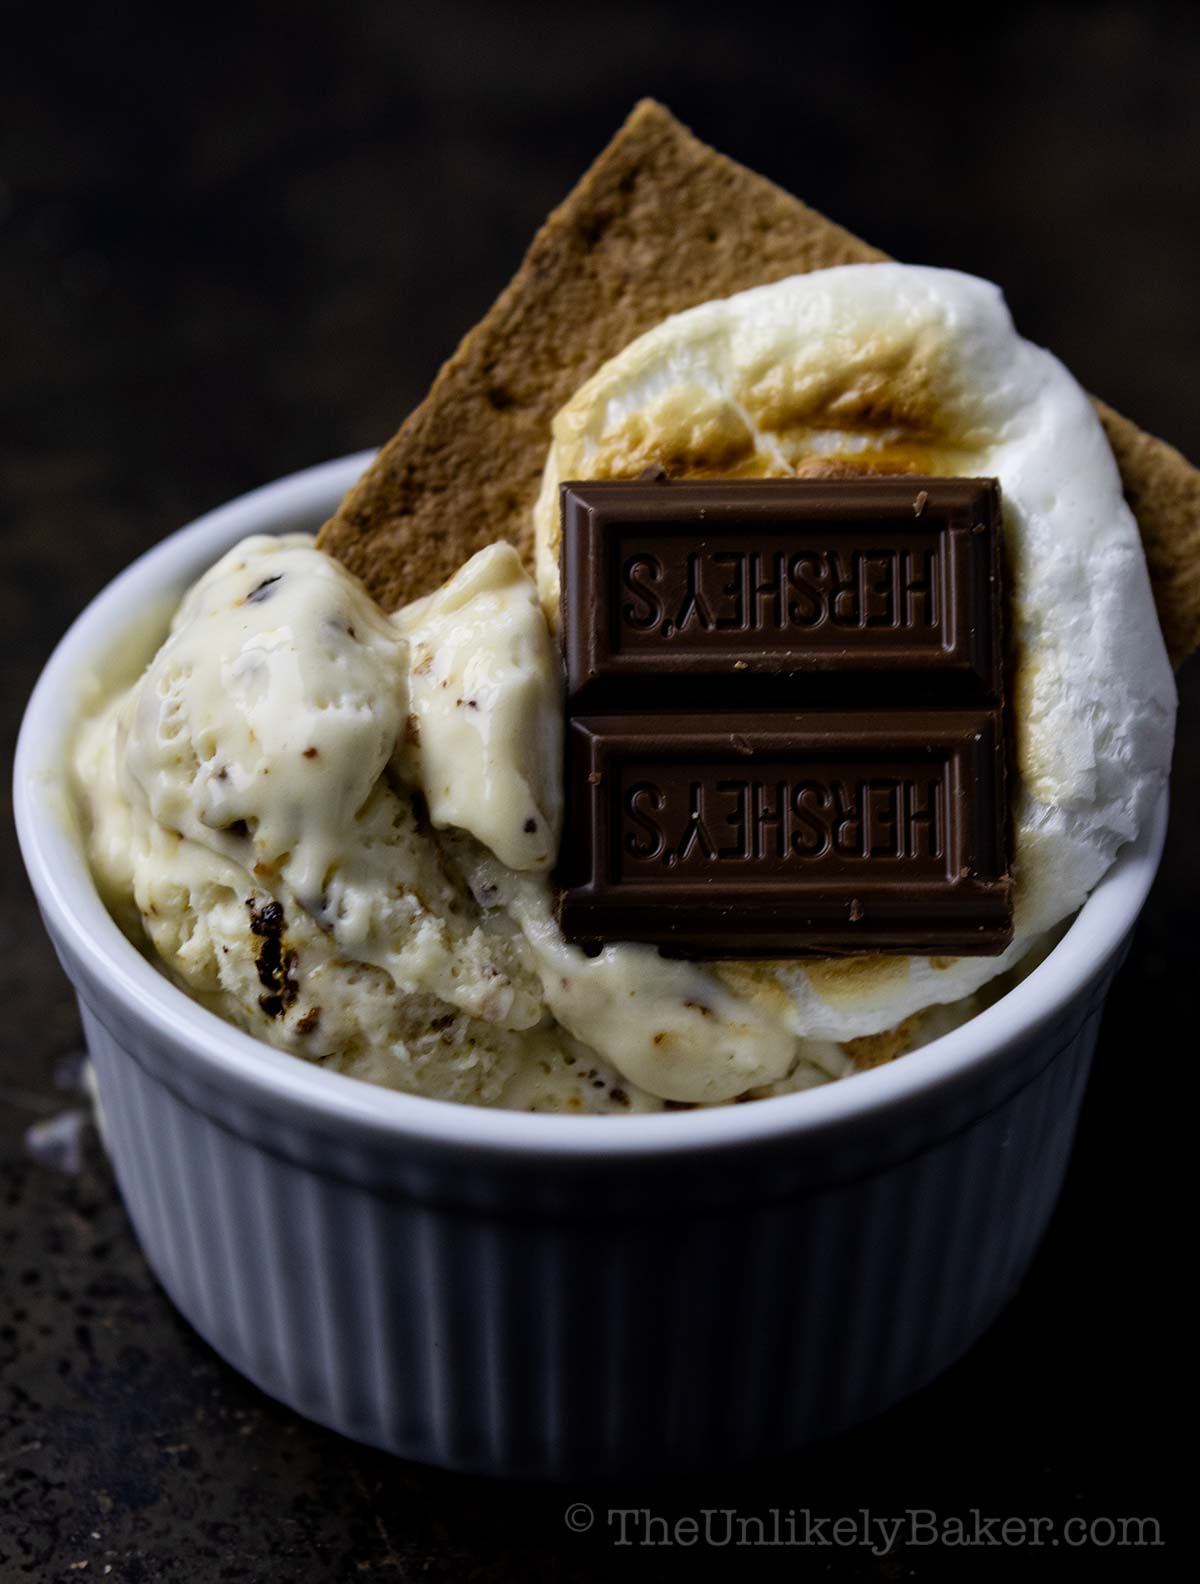 Roasted marshmallow ice cream topped with s'mores.